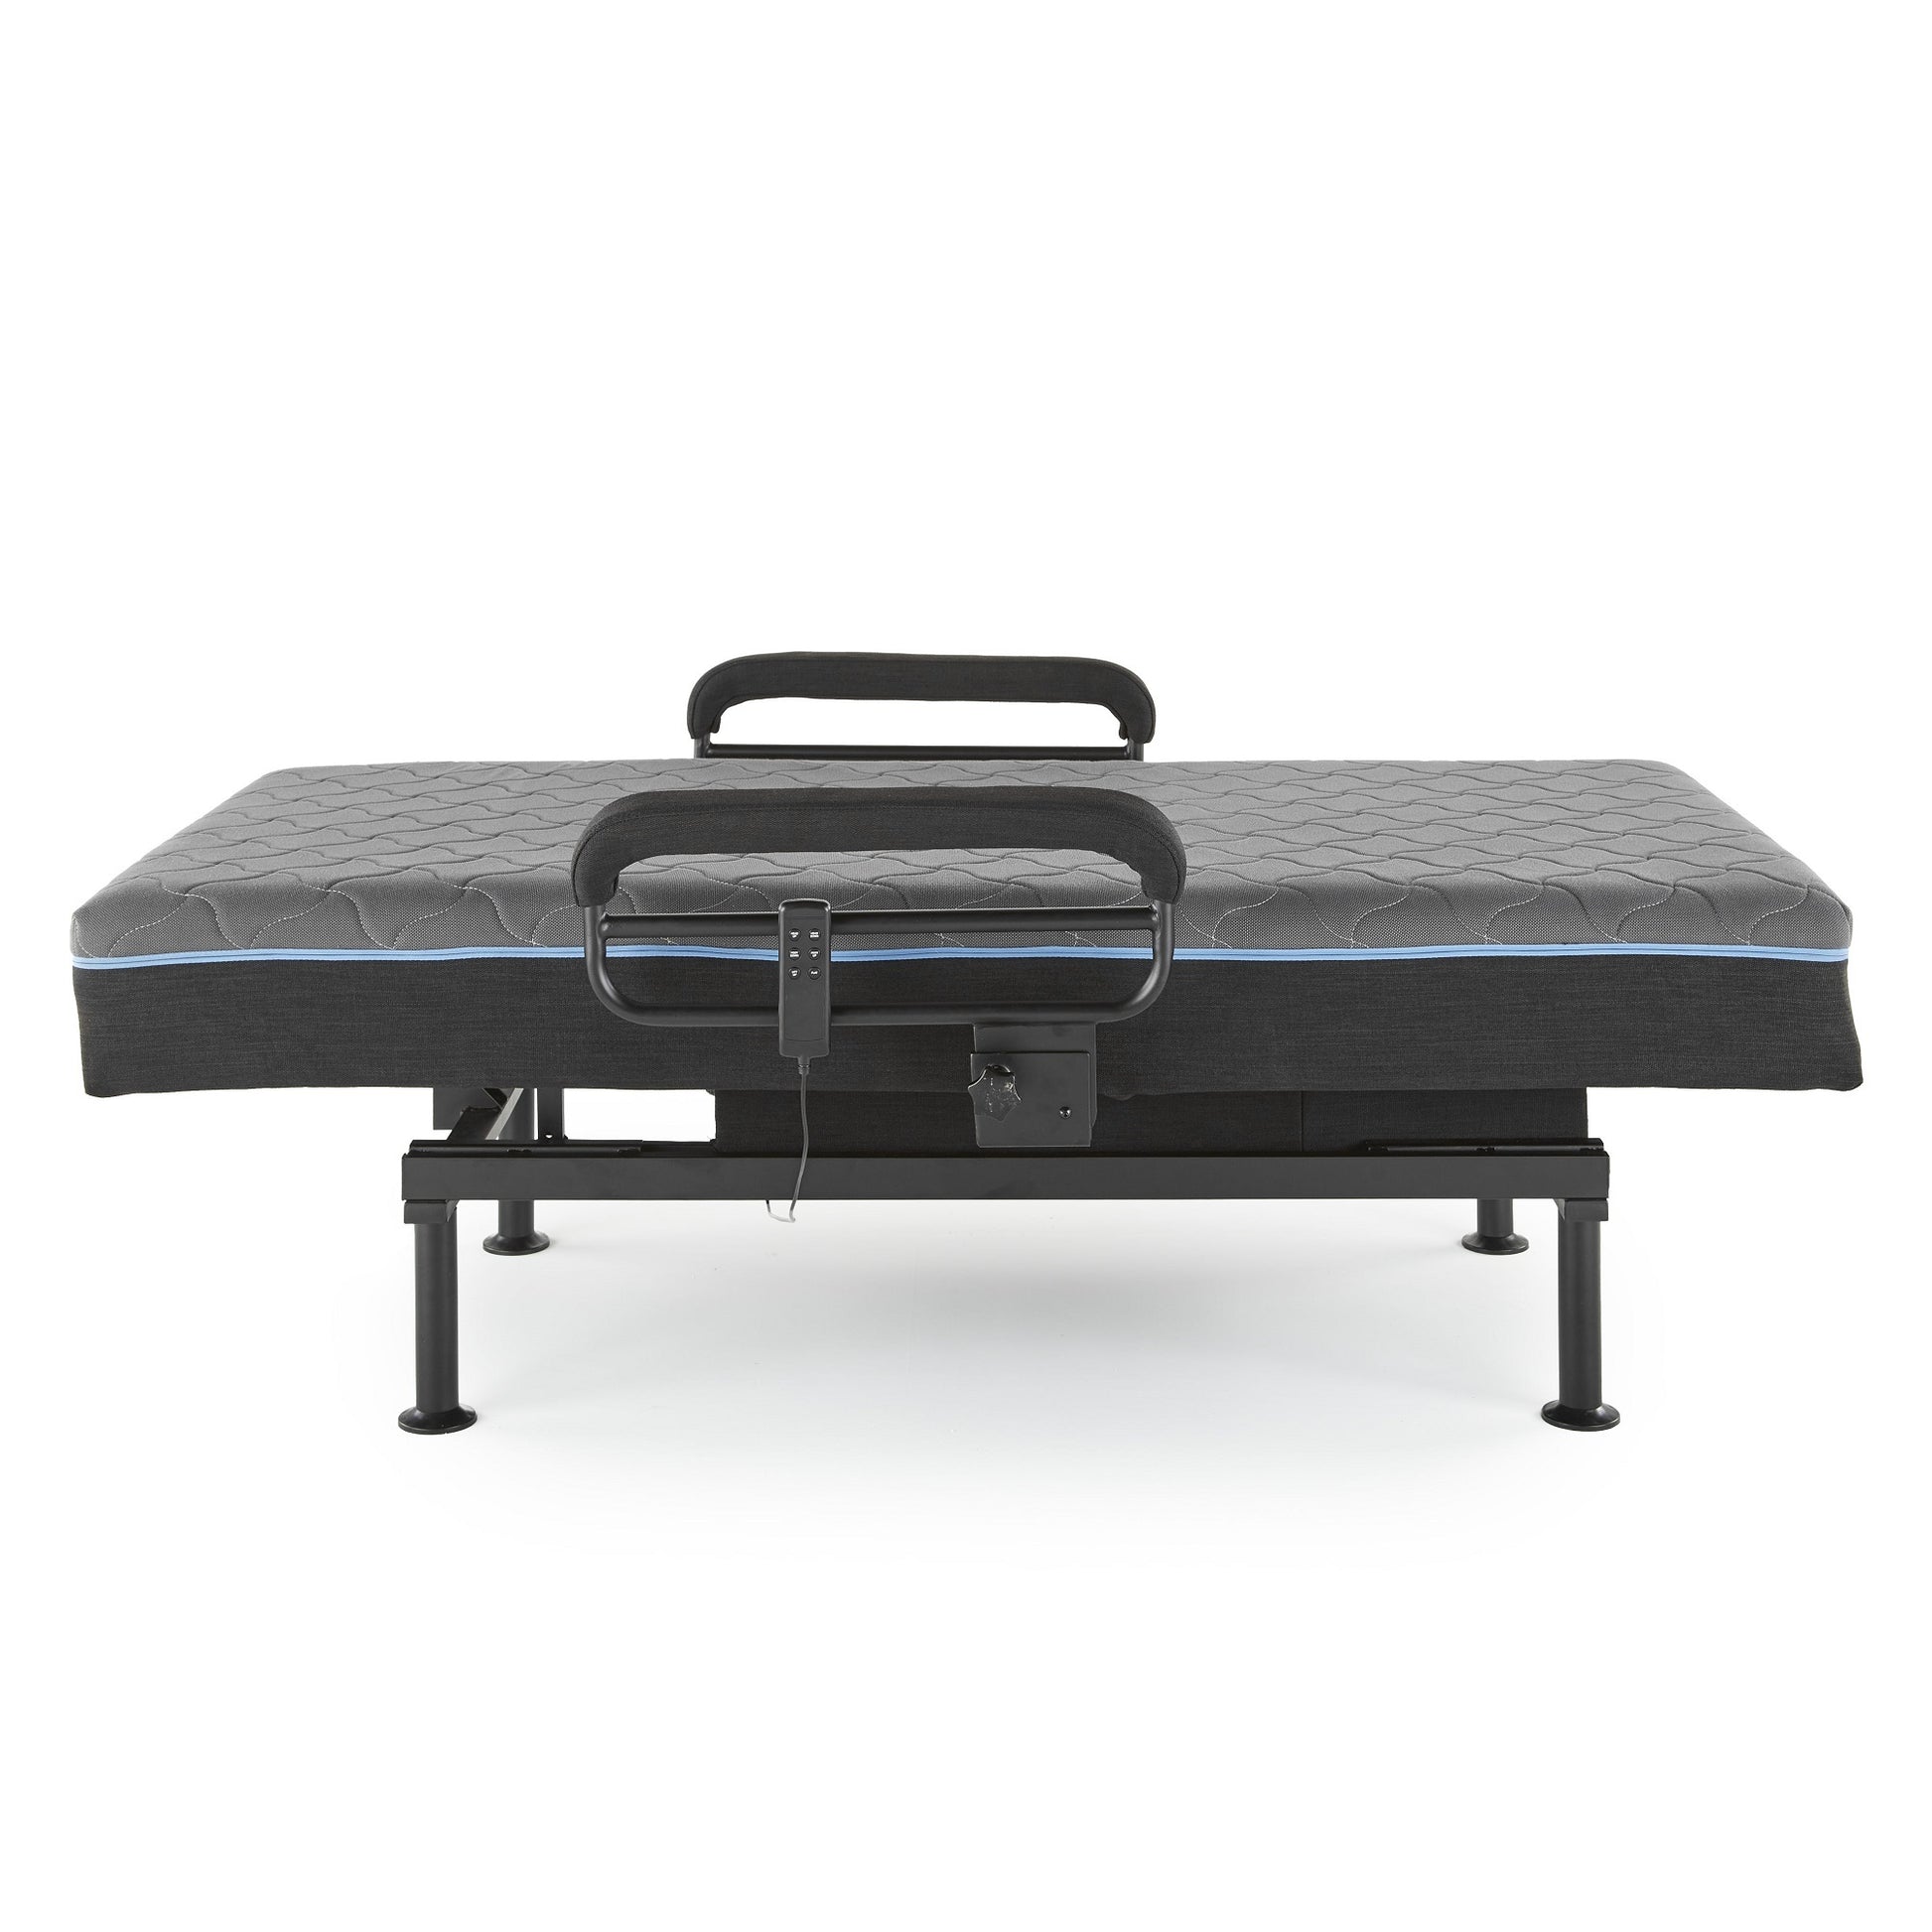 ProCare Posturrific All-in-One Bed, High-Low, Twin Adjustable Bed